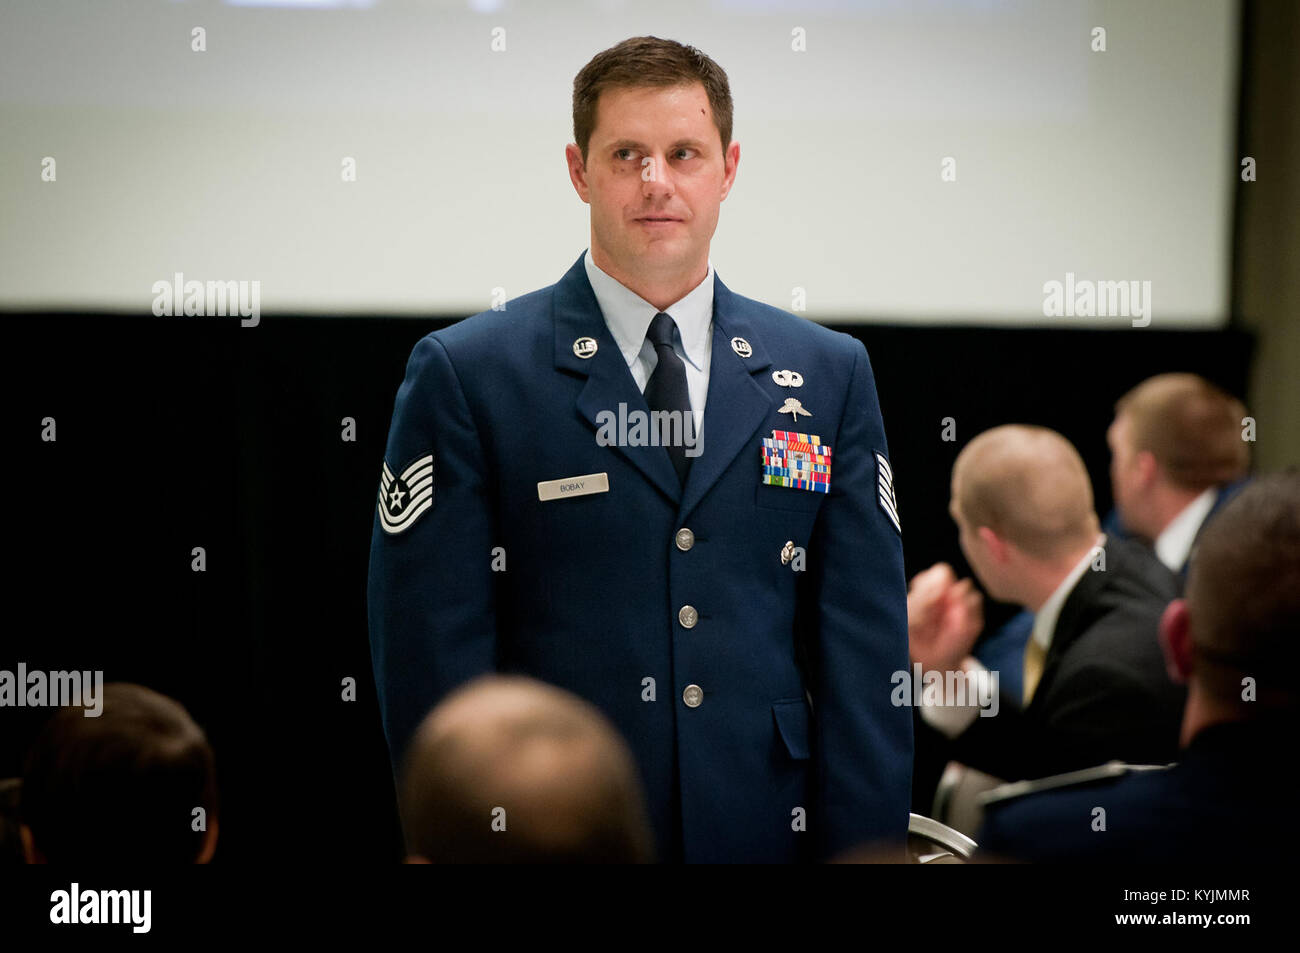 Technical Sgt. Harley Bobay, a combat controller with the 123rd Special Tactics Squadron, stands at attention during the Outstanding Airman and Soldier of the Year Banquet in Louisville, Ky., on March 16, 2013. Bobay is the Kentucky Air National Guard’s Outstanding Non-Commissioned Officer of the Year for 2013. (U.S. Air Force photo by Staff Sgt. Maxwell Rechel) Stock Photo